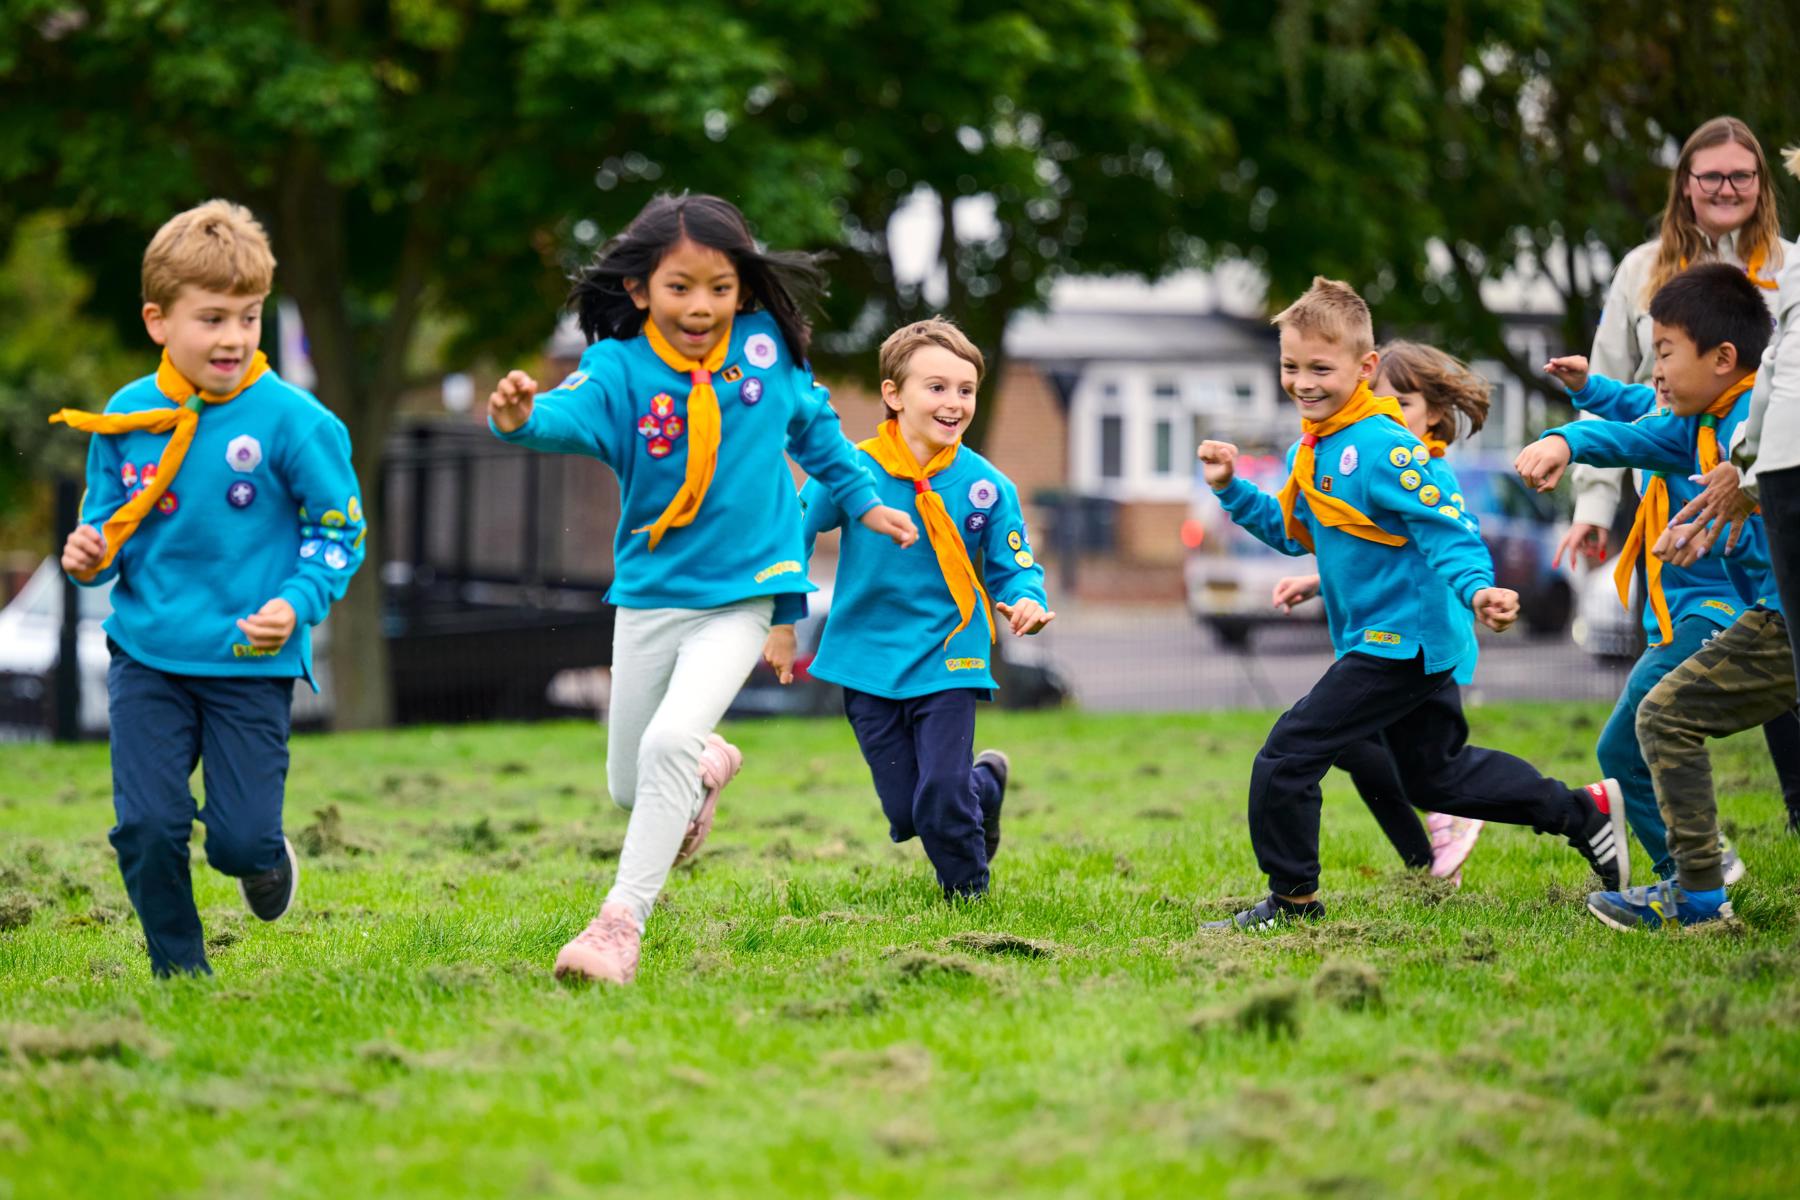 A group of Beavers in blue jumpers and yellow neckers run across grass while playing a game.